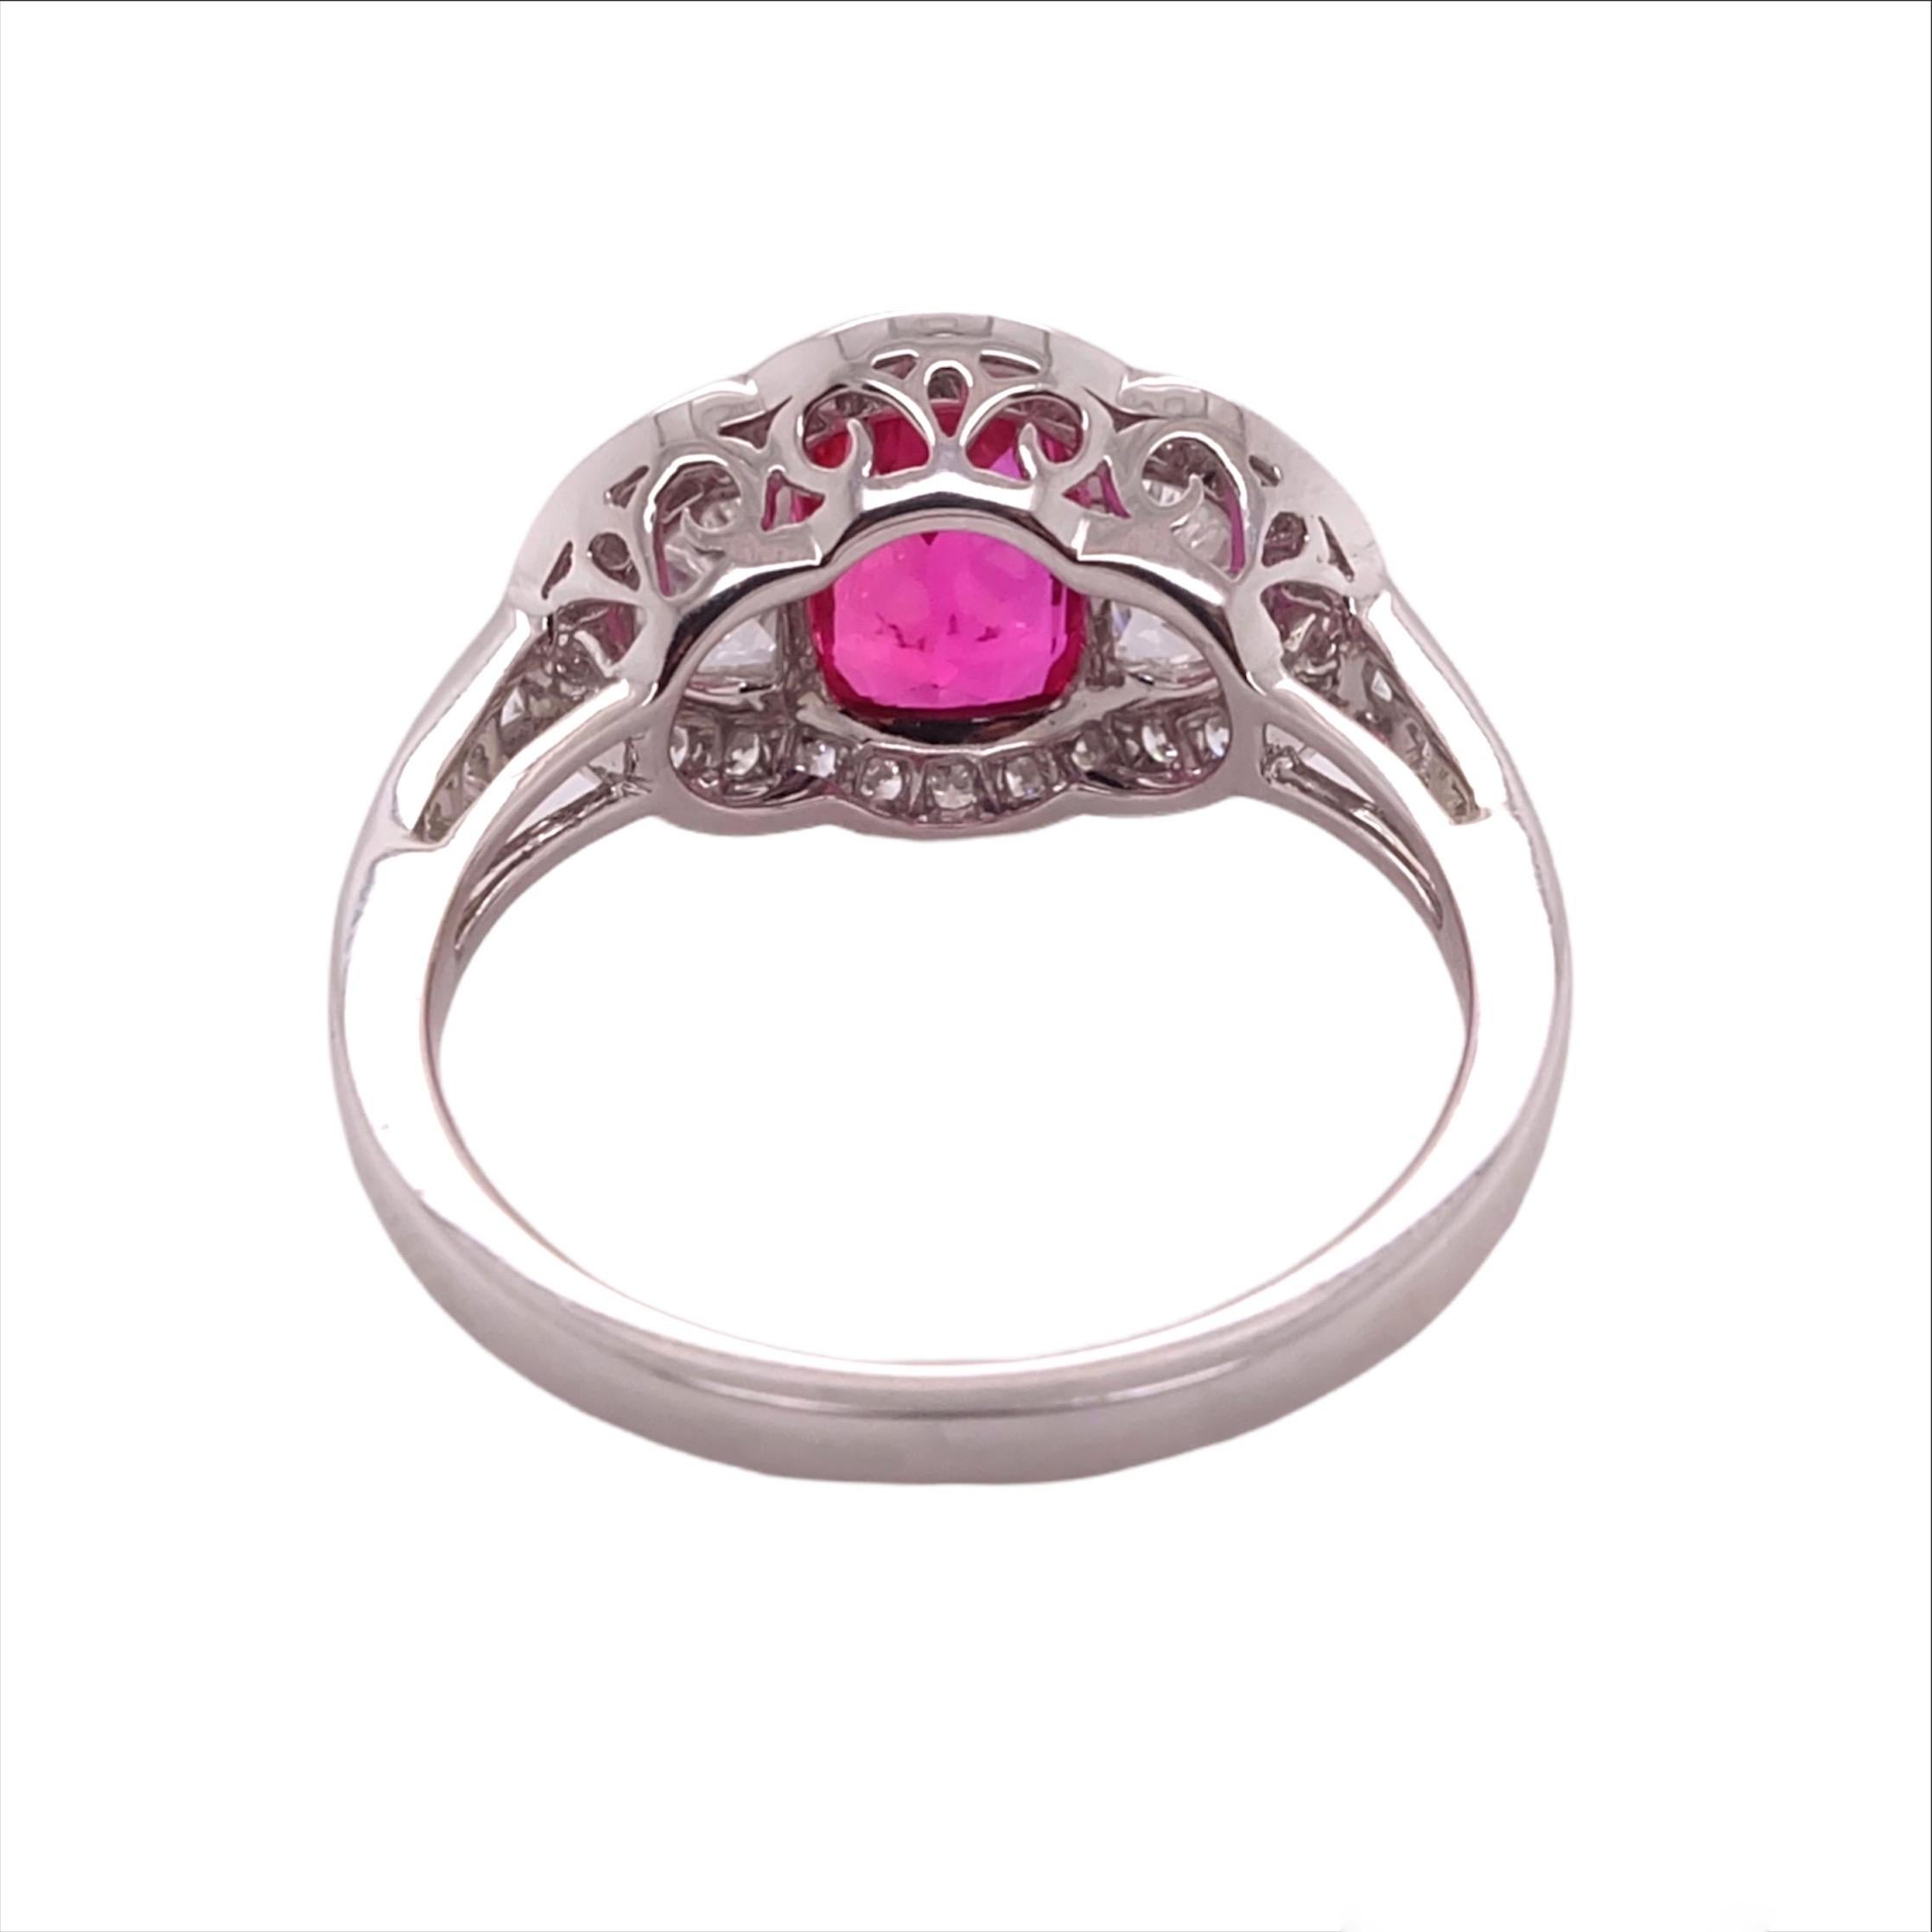 Art Deco Sophia D, GIA Certified 2.06 Carat Ruby and 0.68 Carat Diamond Ring in Platinum For Sale